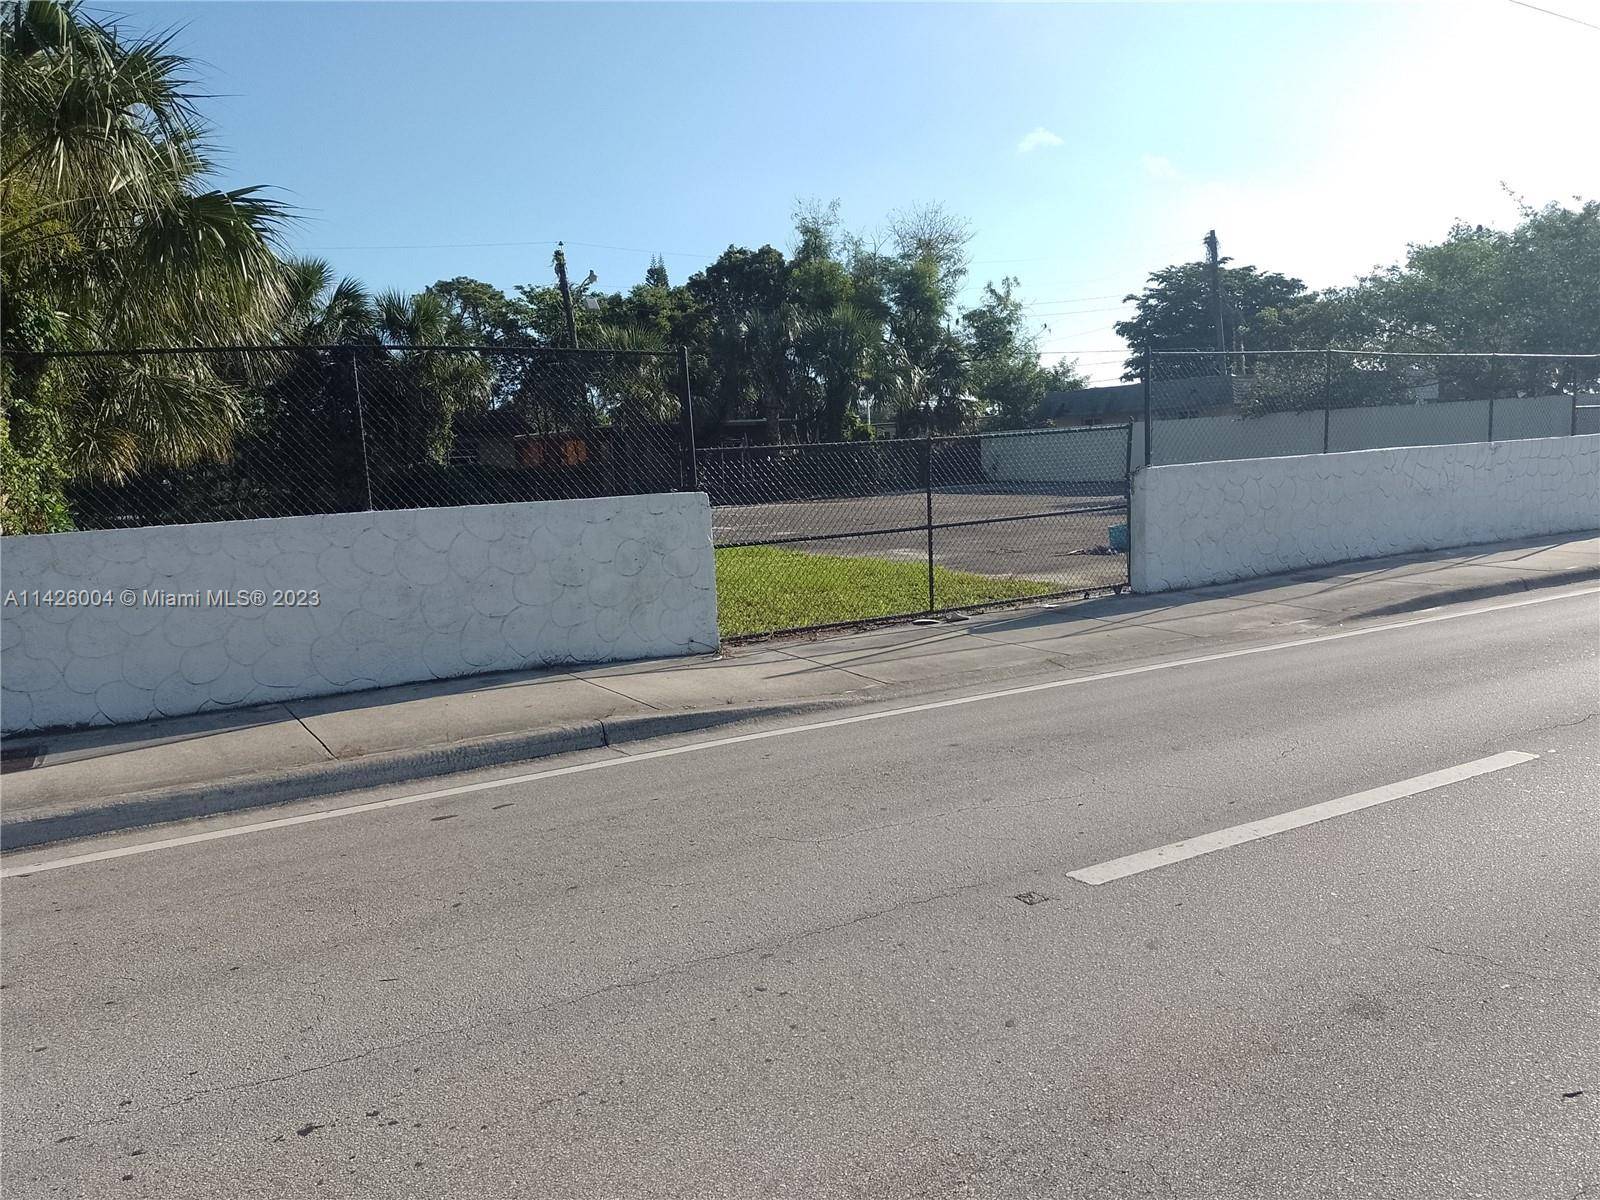 Rare opportunity to build a dream home in one of Broward's redeveloping and historic areas Property is Zoned RS 6, Land Use 33 Low